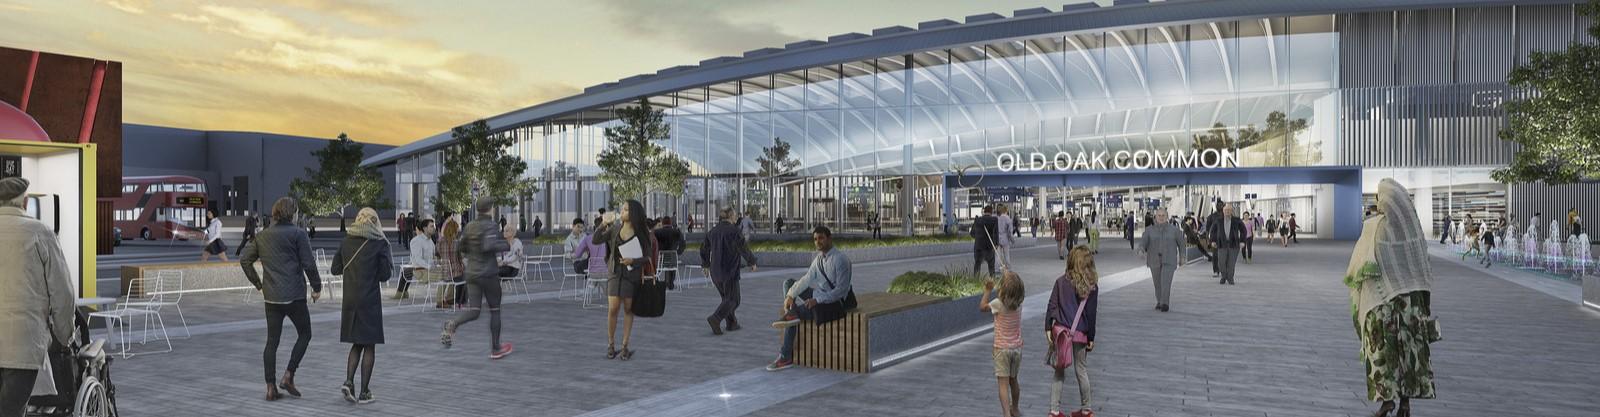 An artist's impression of Old Oak Common Station